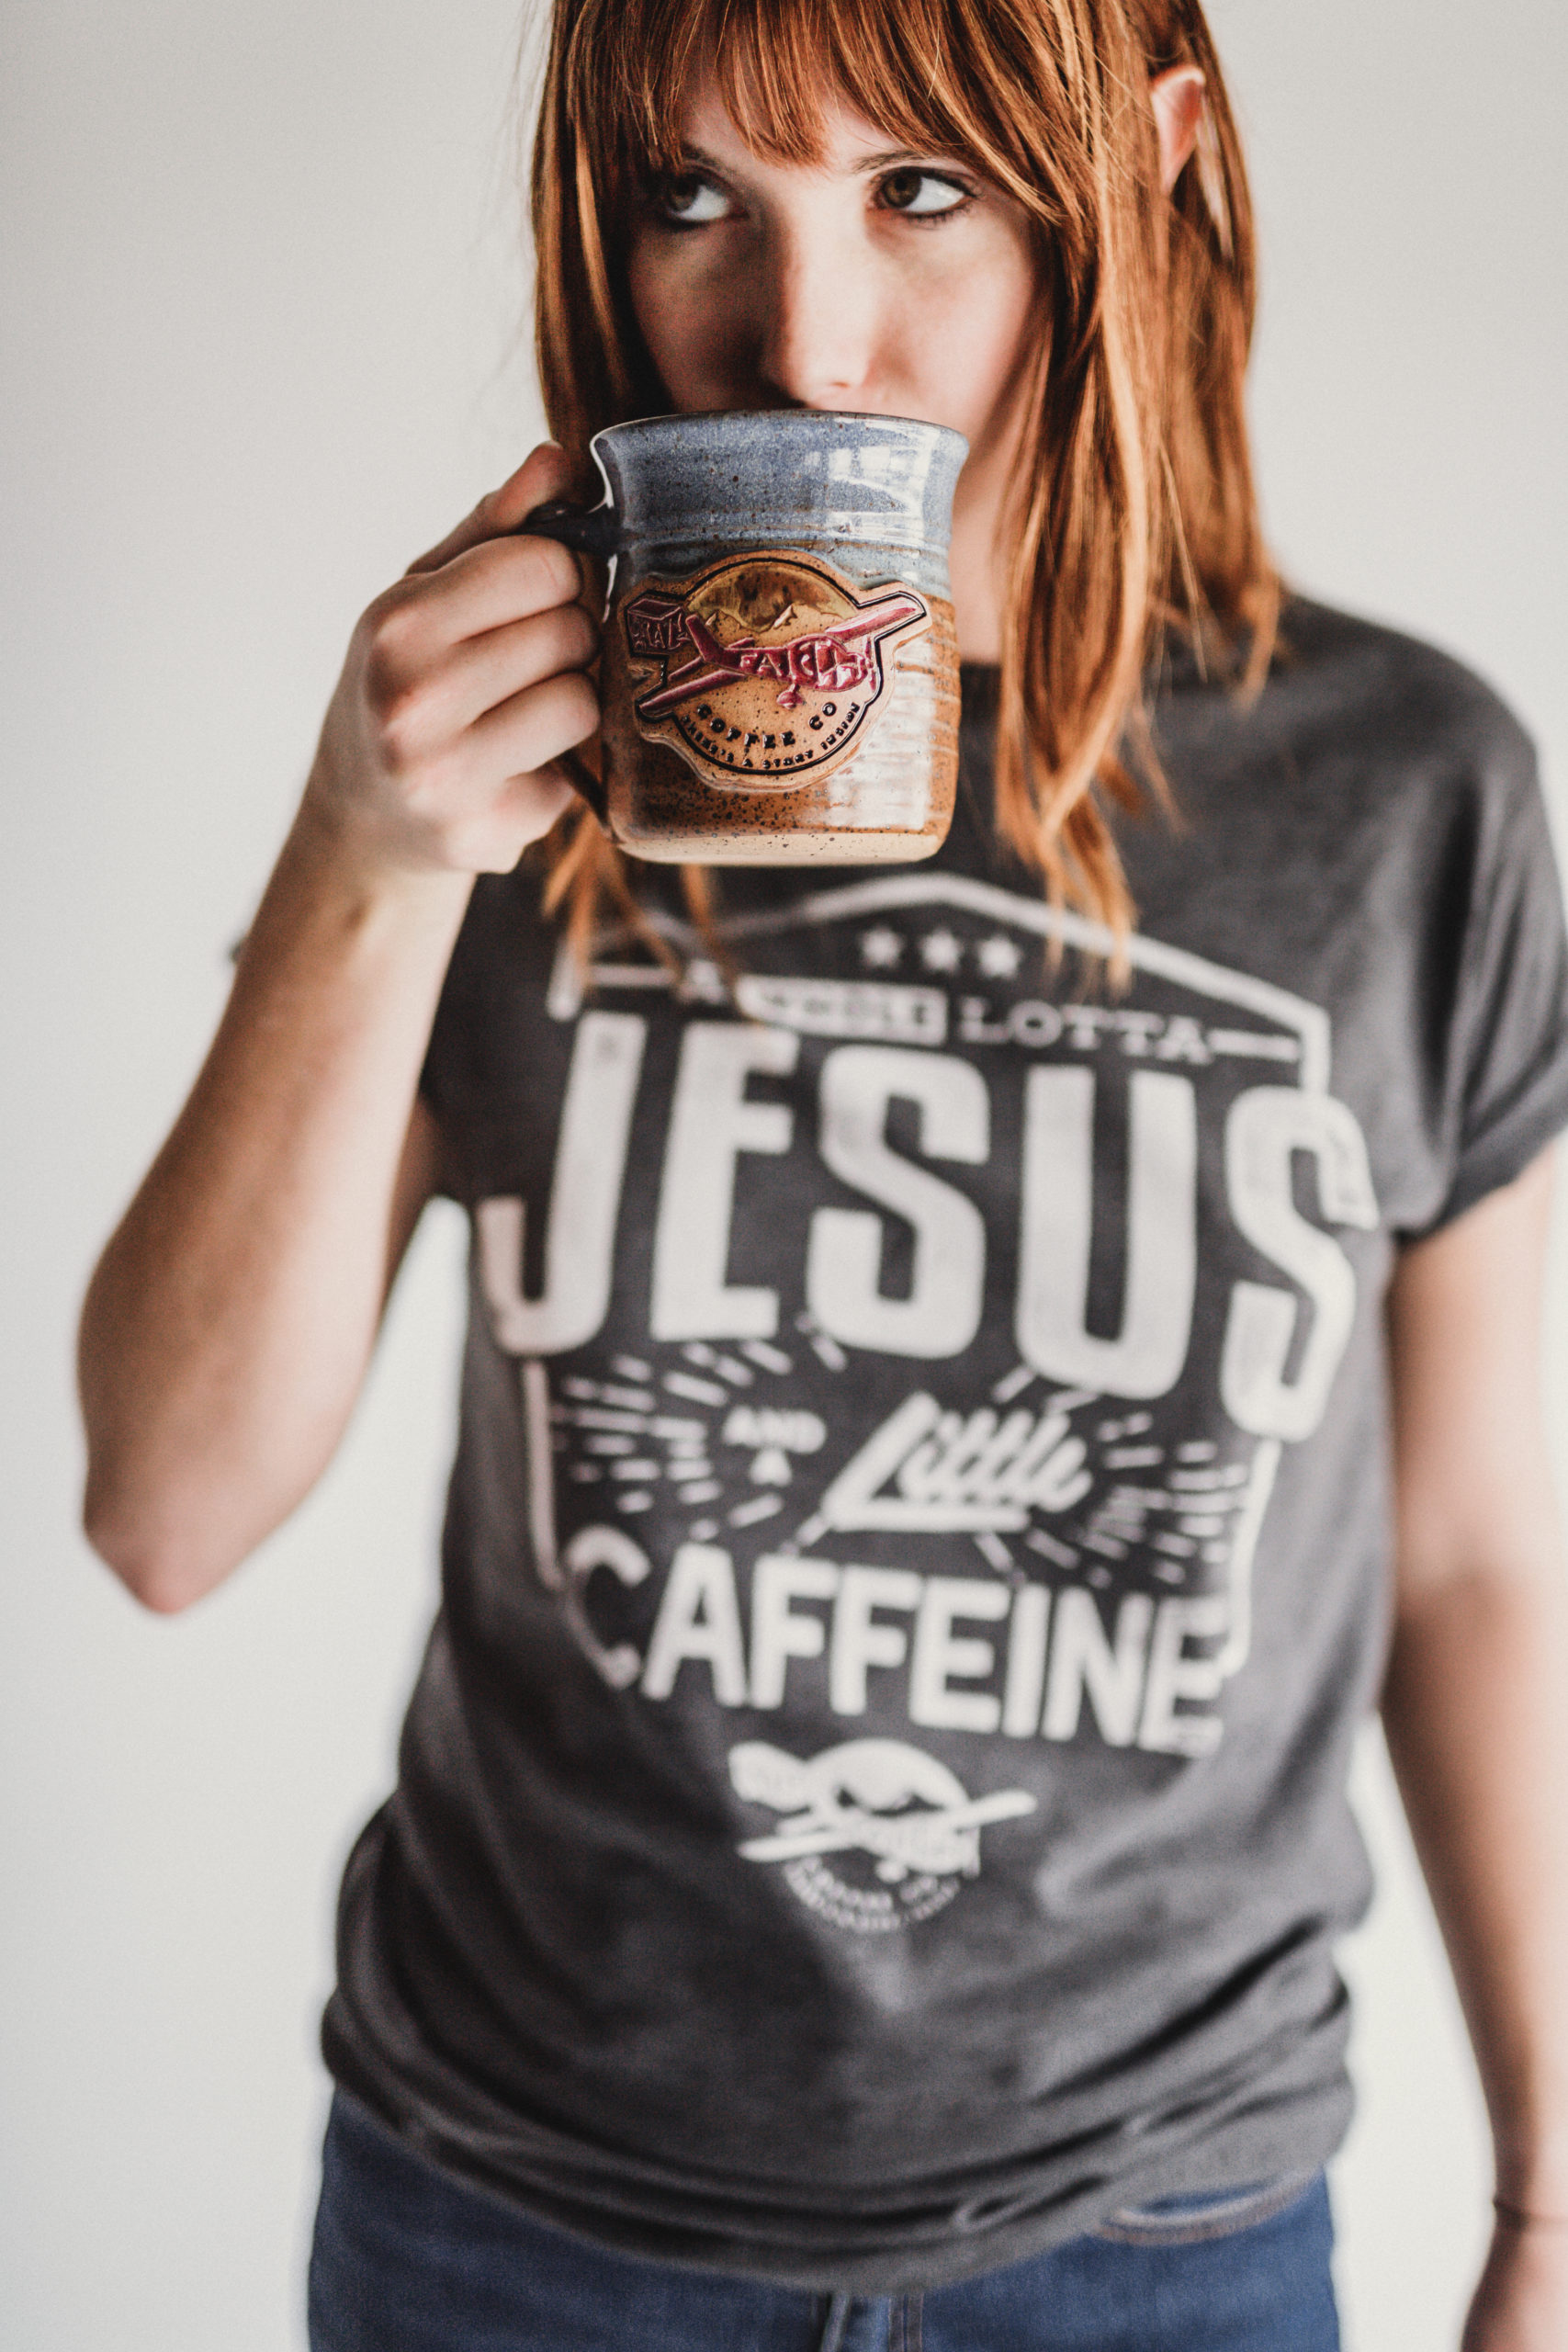 Woman wearing a gray t shirt that says A Whole Lotta Jesus and a Little Caffeine from Crazy Faith drinking some coffee from a gray coffee cup